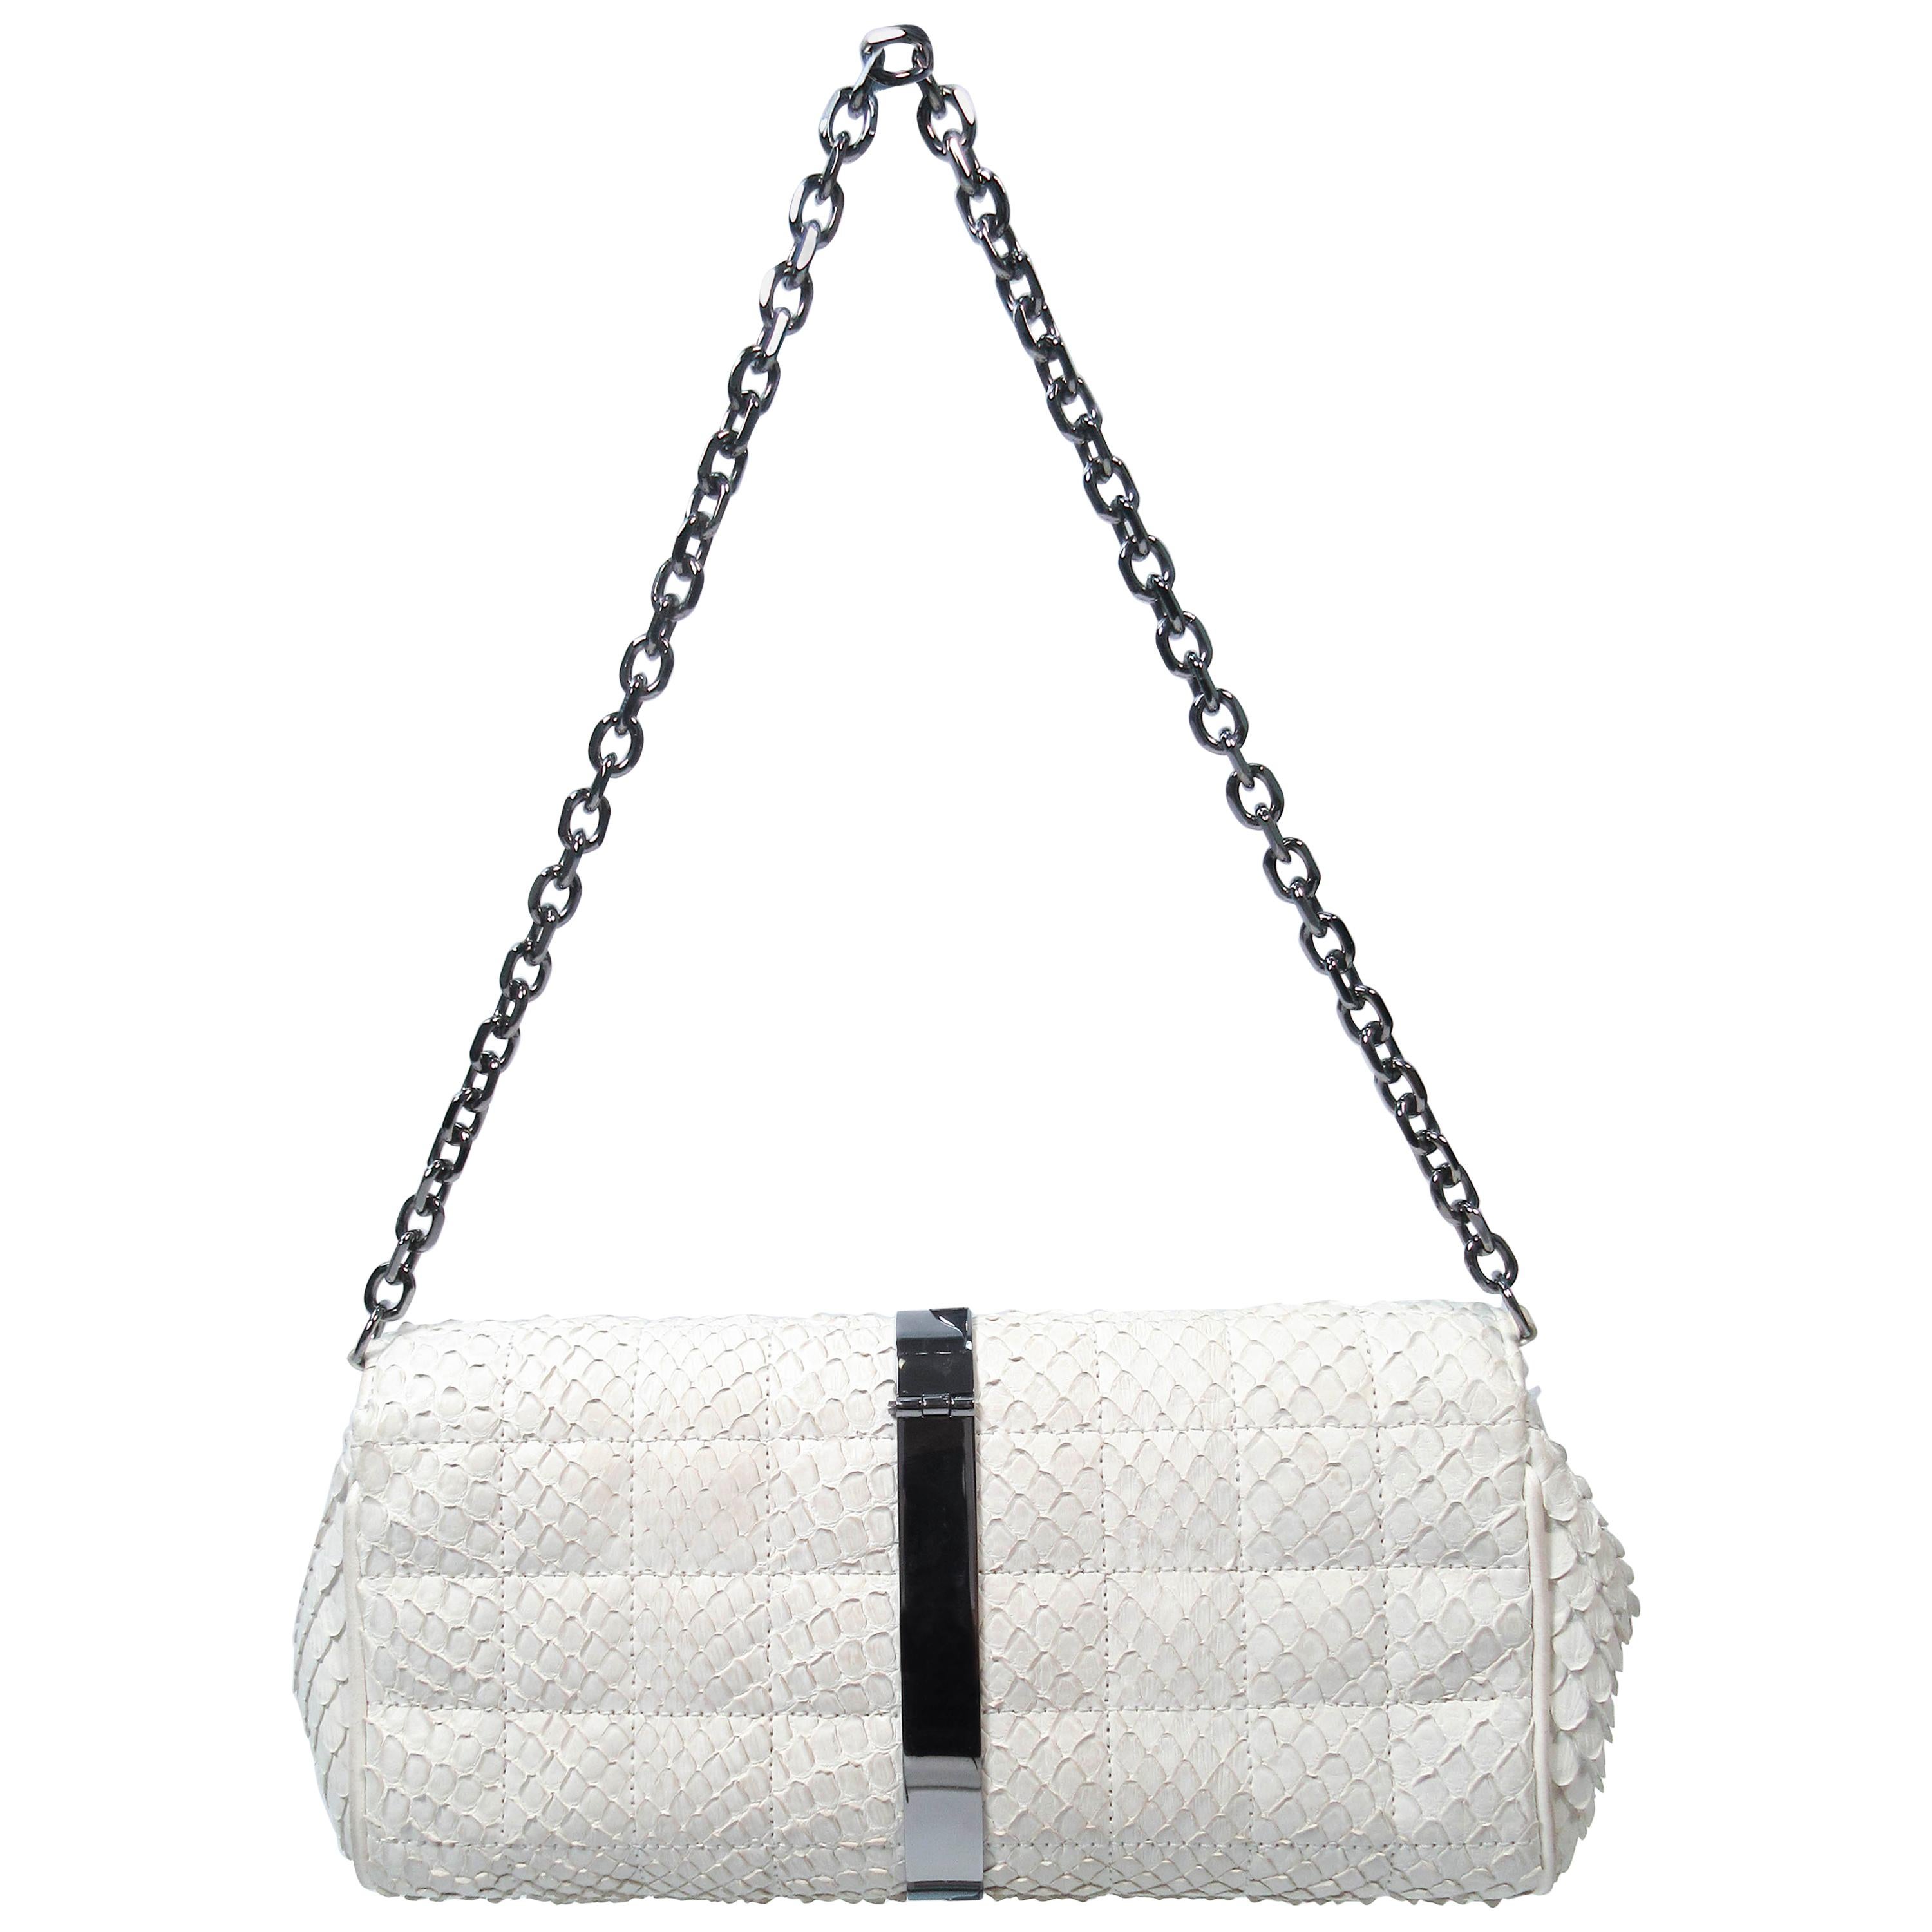 This Chanel purse is composed of white snakeskin. Features silver metal hardware with box and dustbag. In excellent pre-owned condition (some signs of wear due to age, see photos). Sold in 